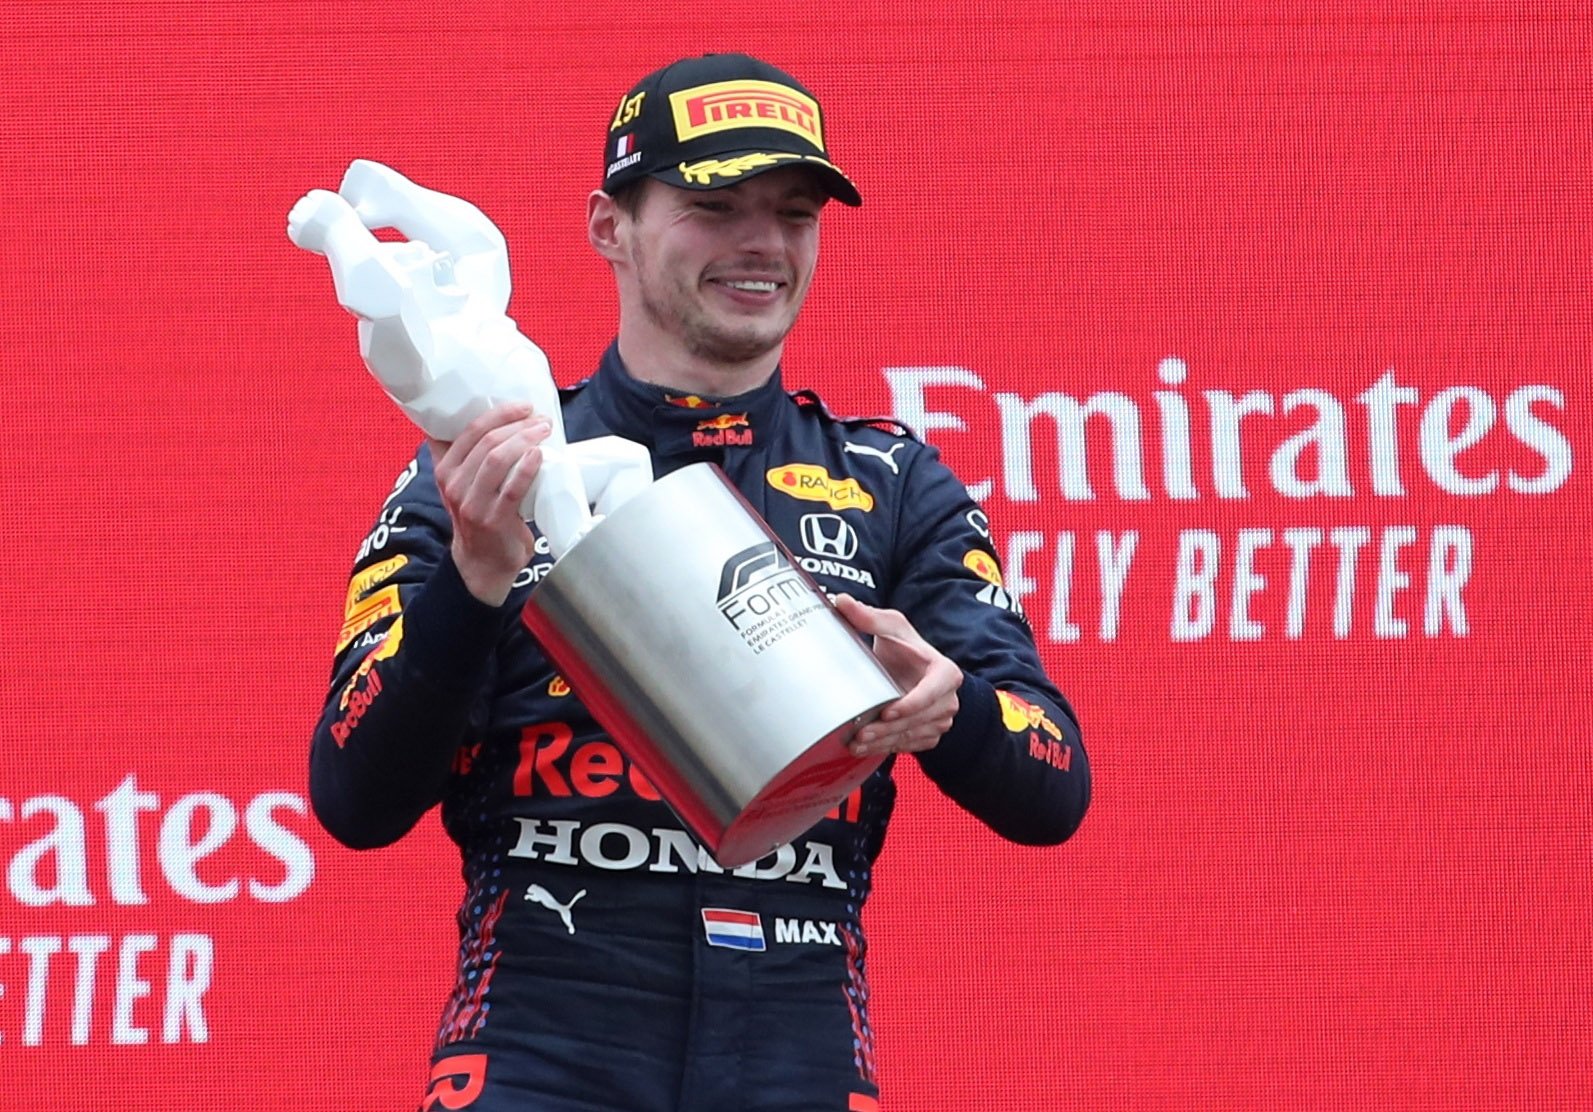 Red Bull's Max Verstappen celebrates with a trophy on the podium after winning the Formula One French Grand Prix at Circuit Paul Ricard, Le Castellet, France, June 20, 2021. (Reuters Photo)